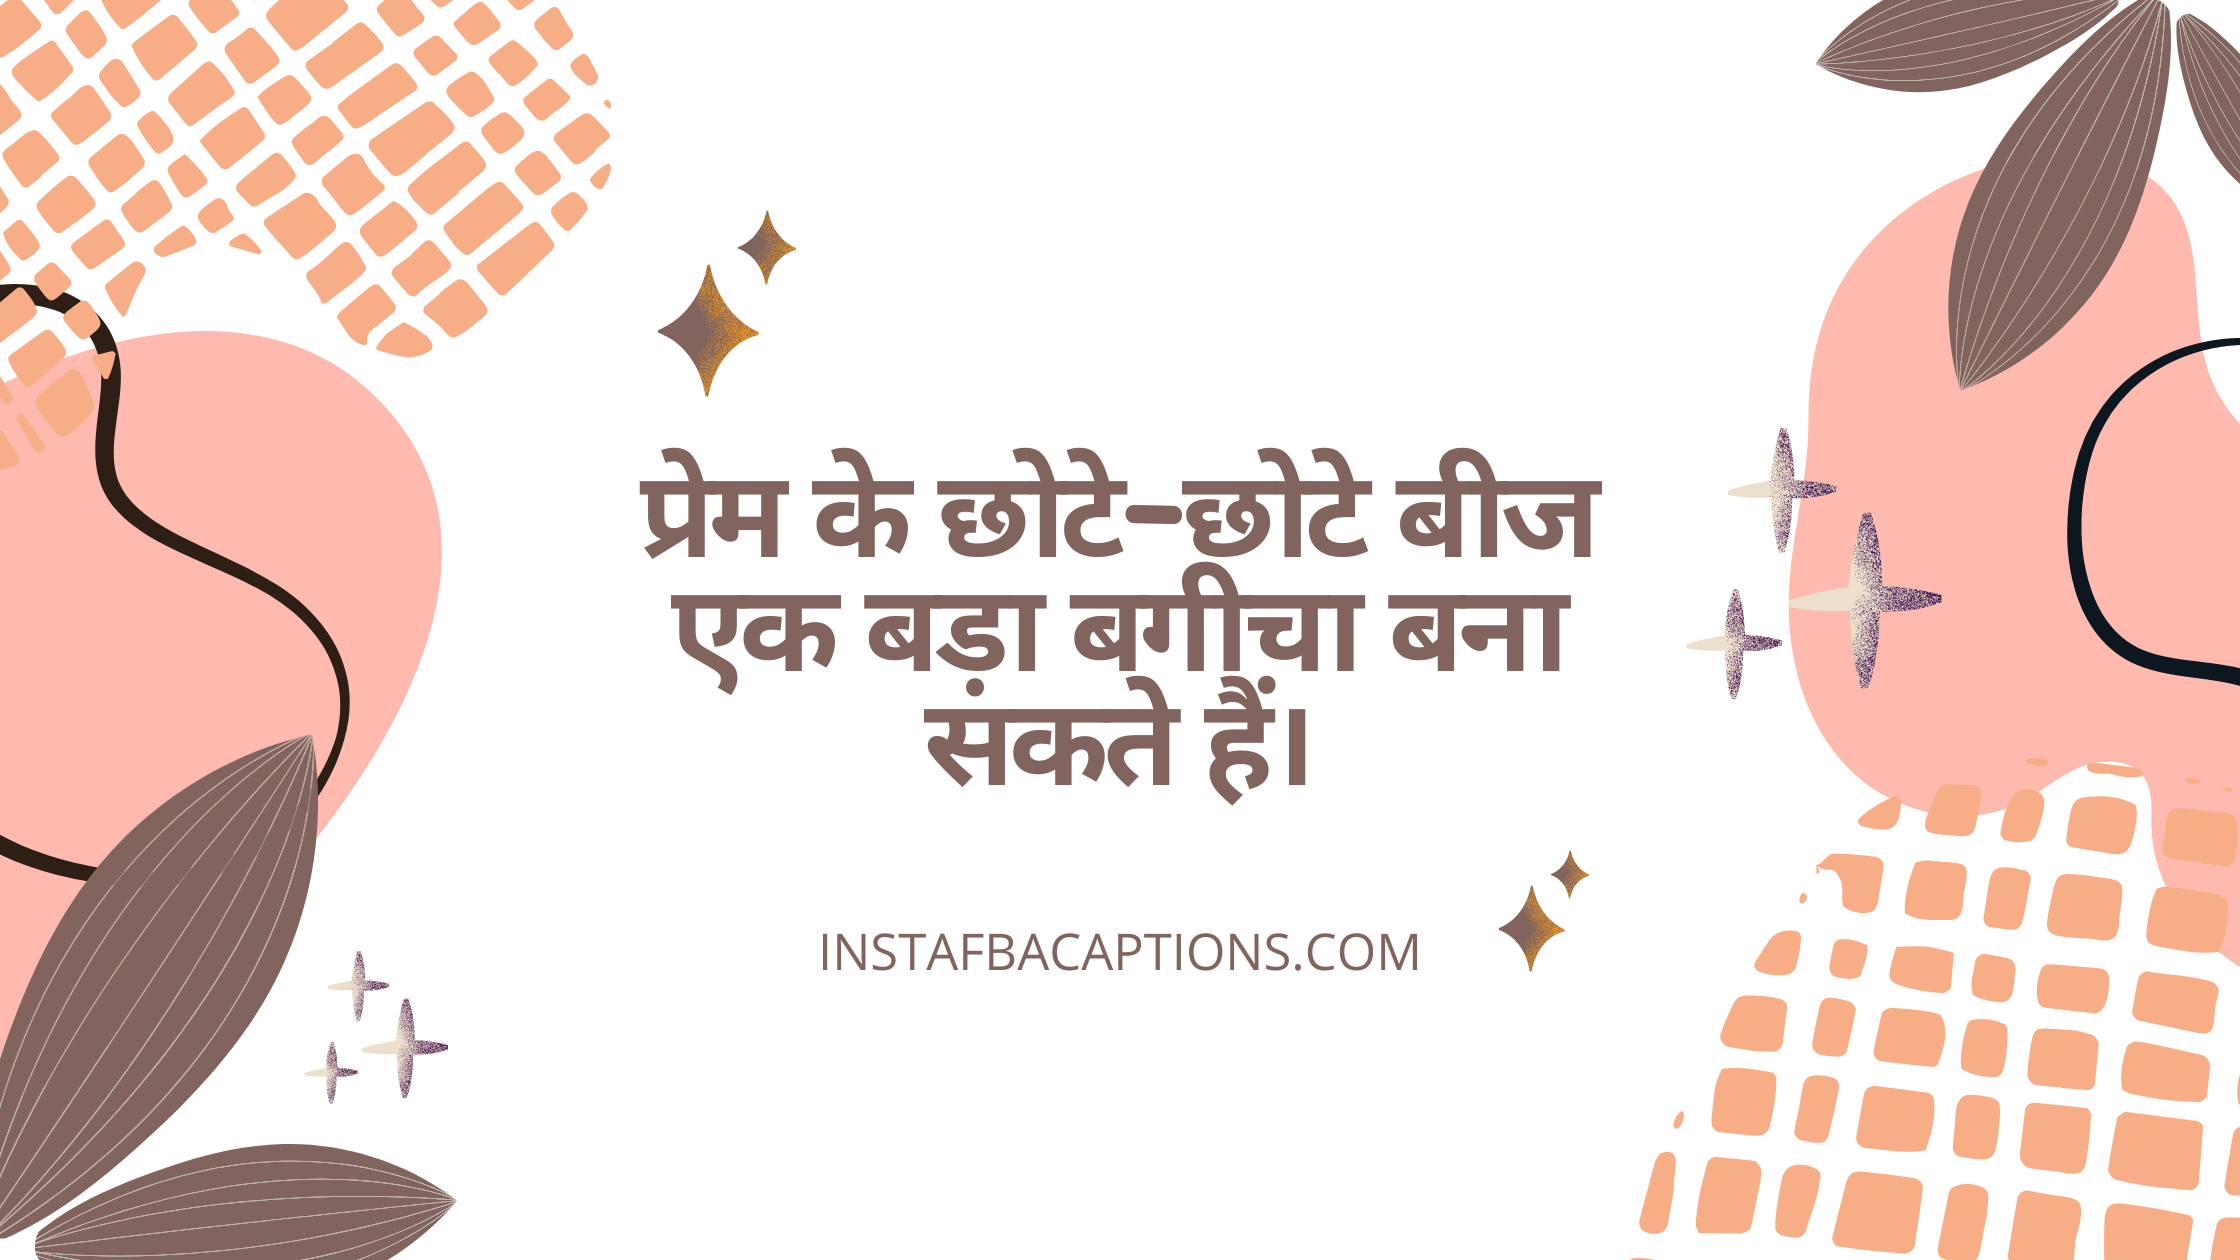 God Captions In Hindi  - God Captions in Hindi - 89 GOD Instagram Captions, Quotes, Hashtags in 2022